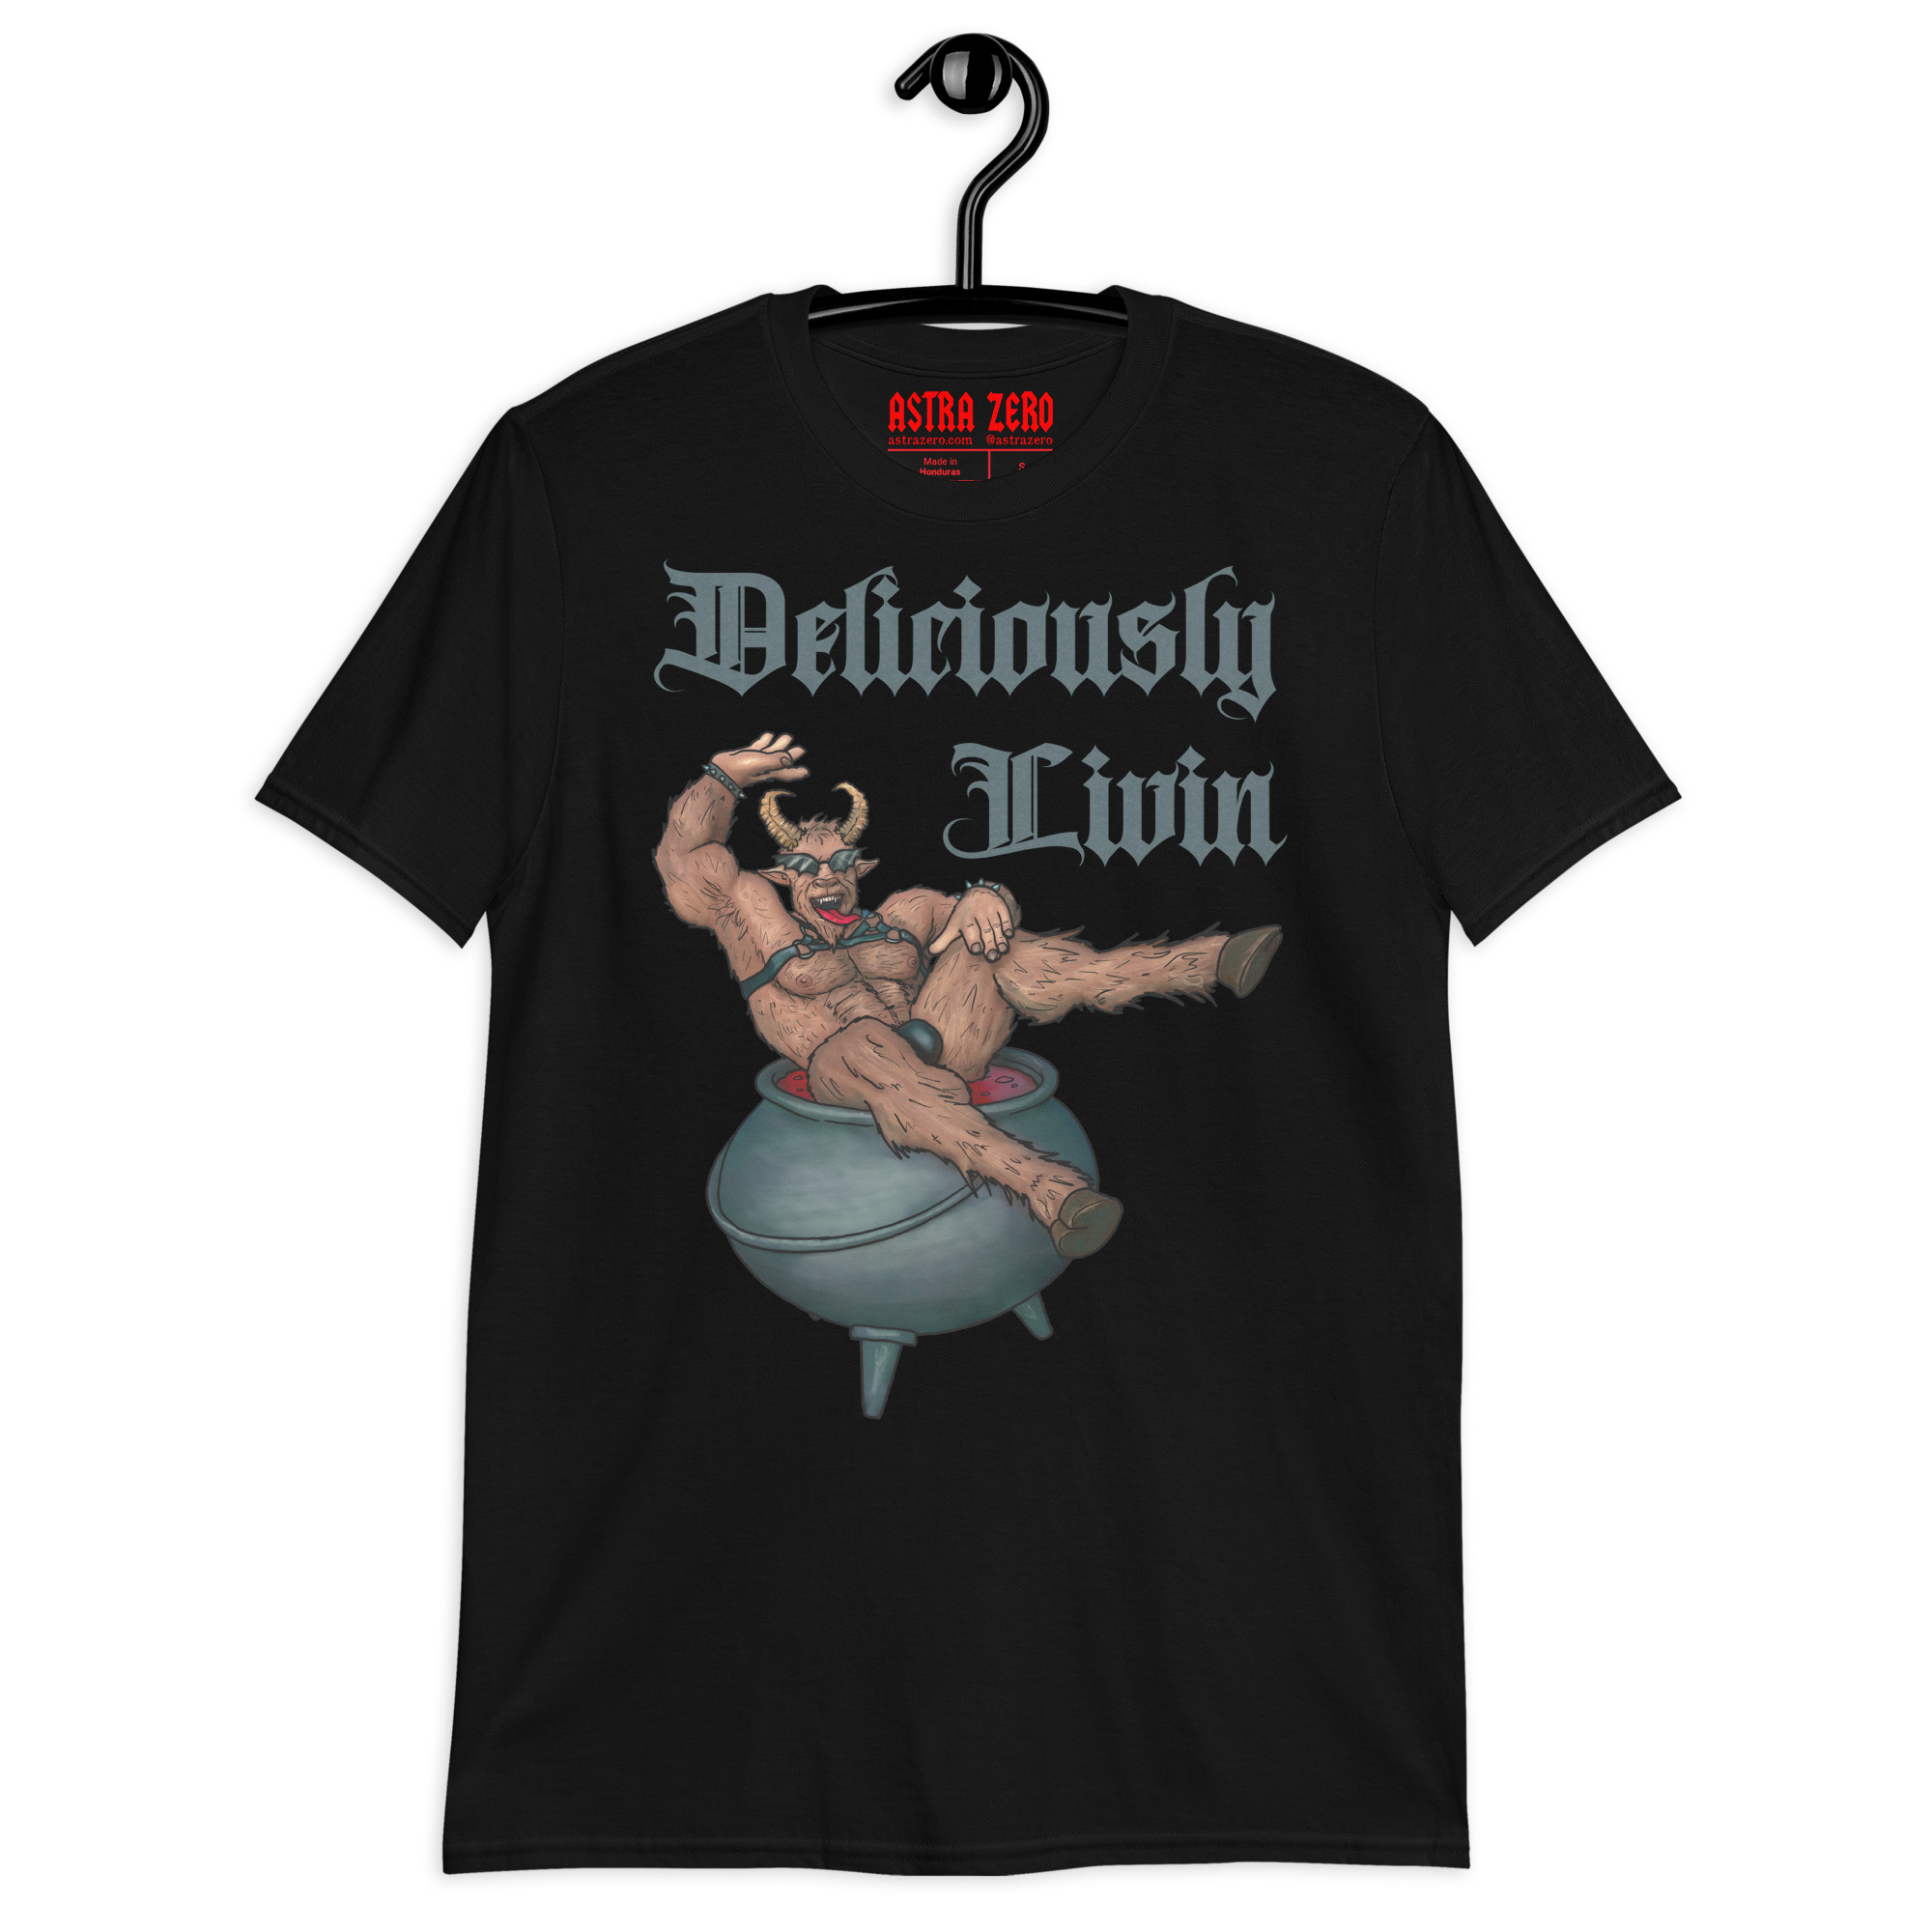 Featured image for “Deliciously Livin - Short-Sleeve Unisex T-Shirt”